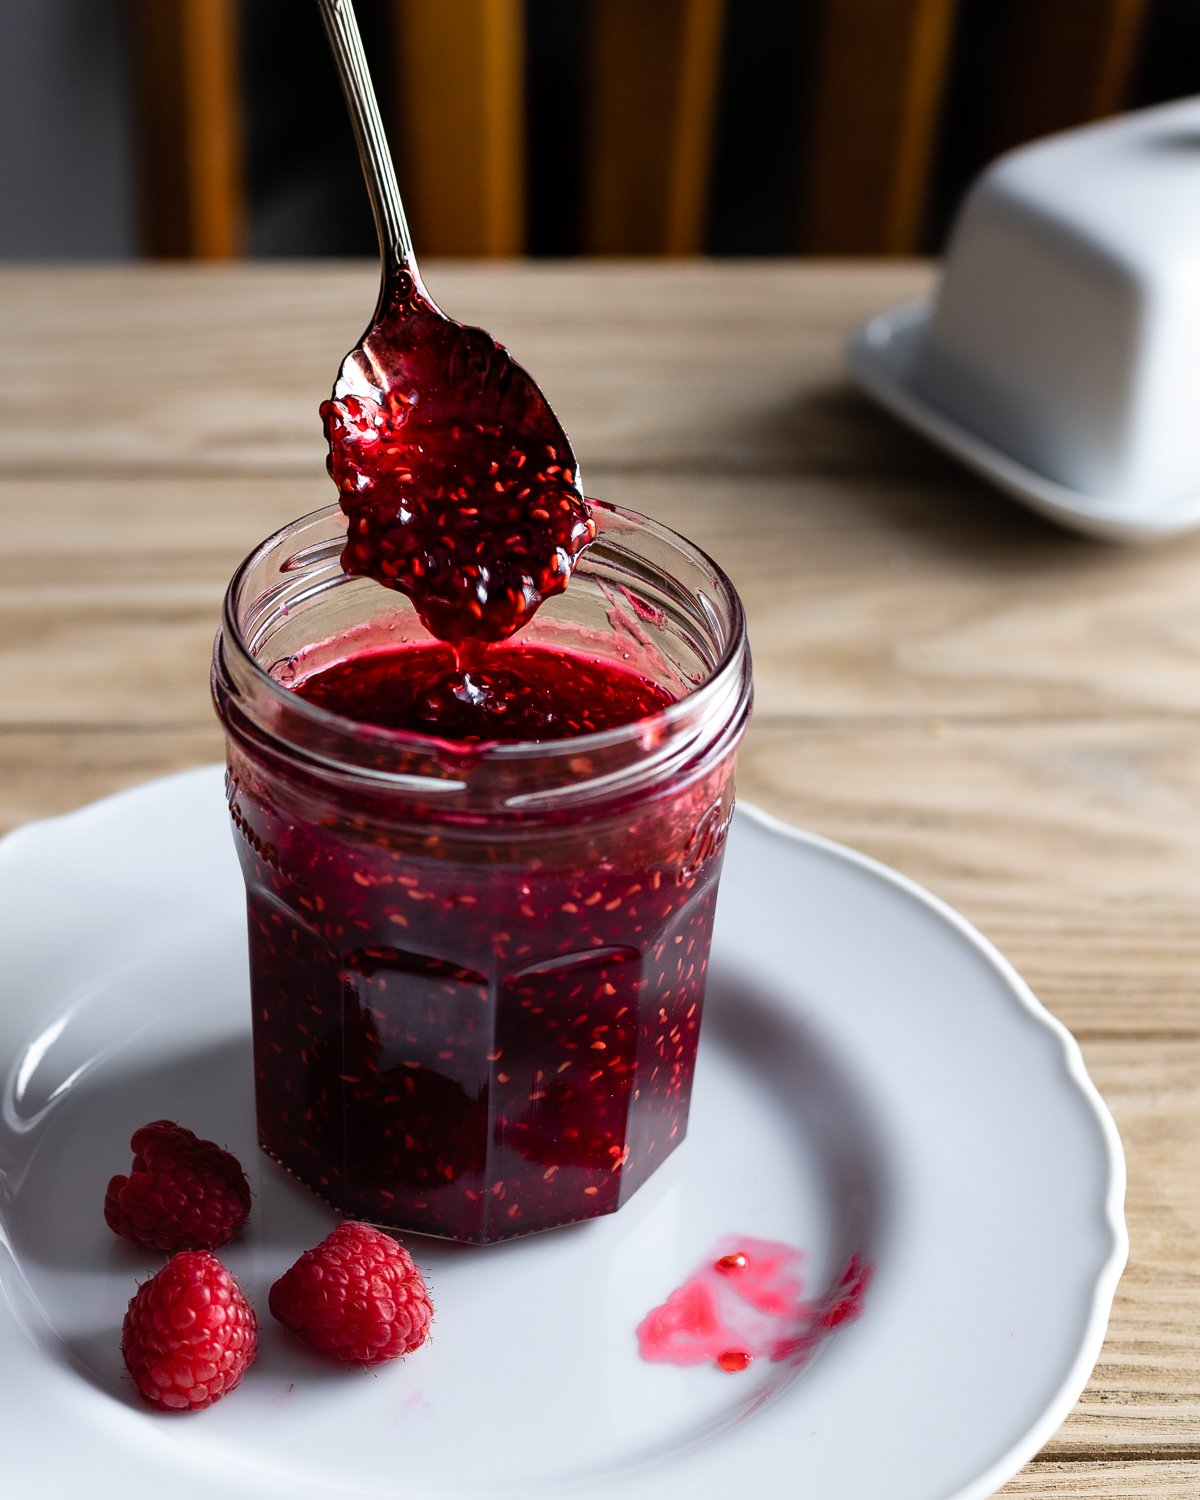 spoon scooping chunky raspberry preserves in a jar on a plate